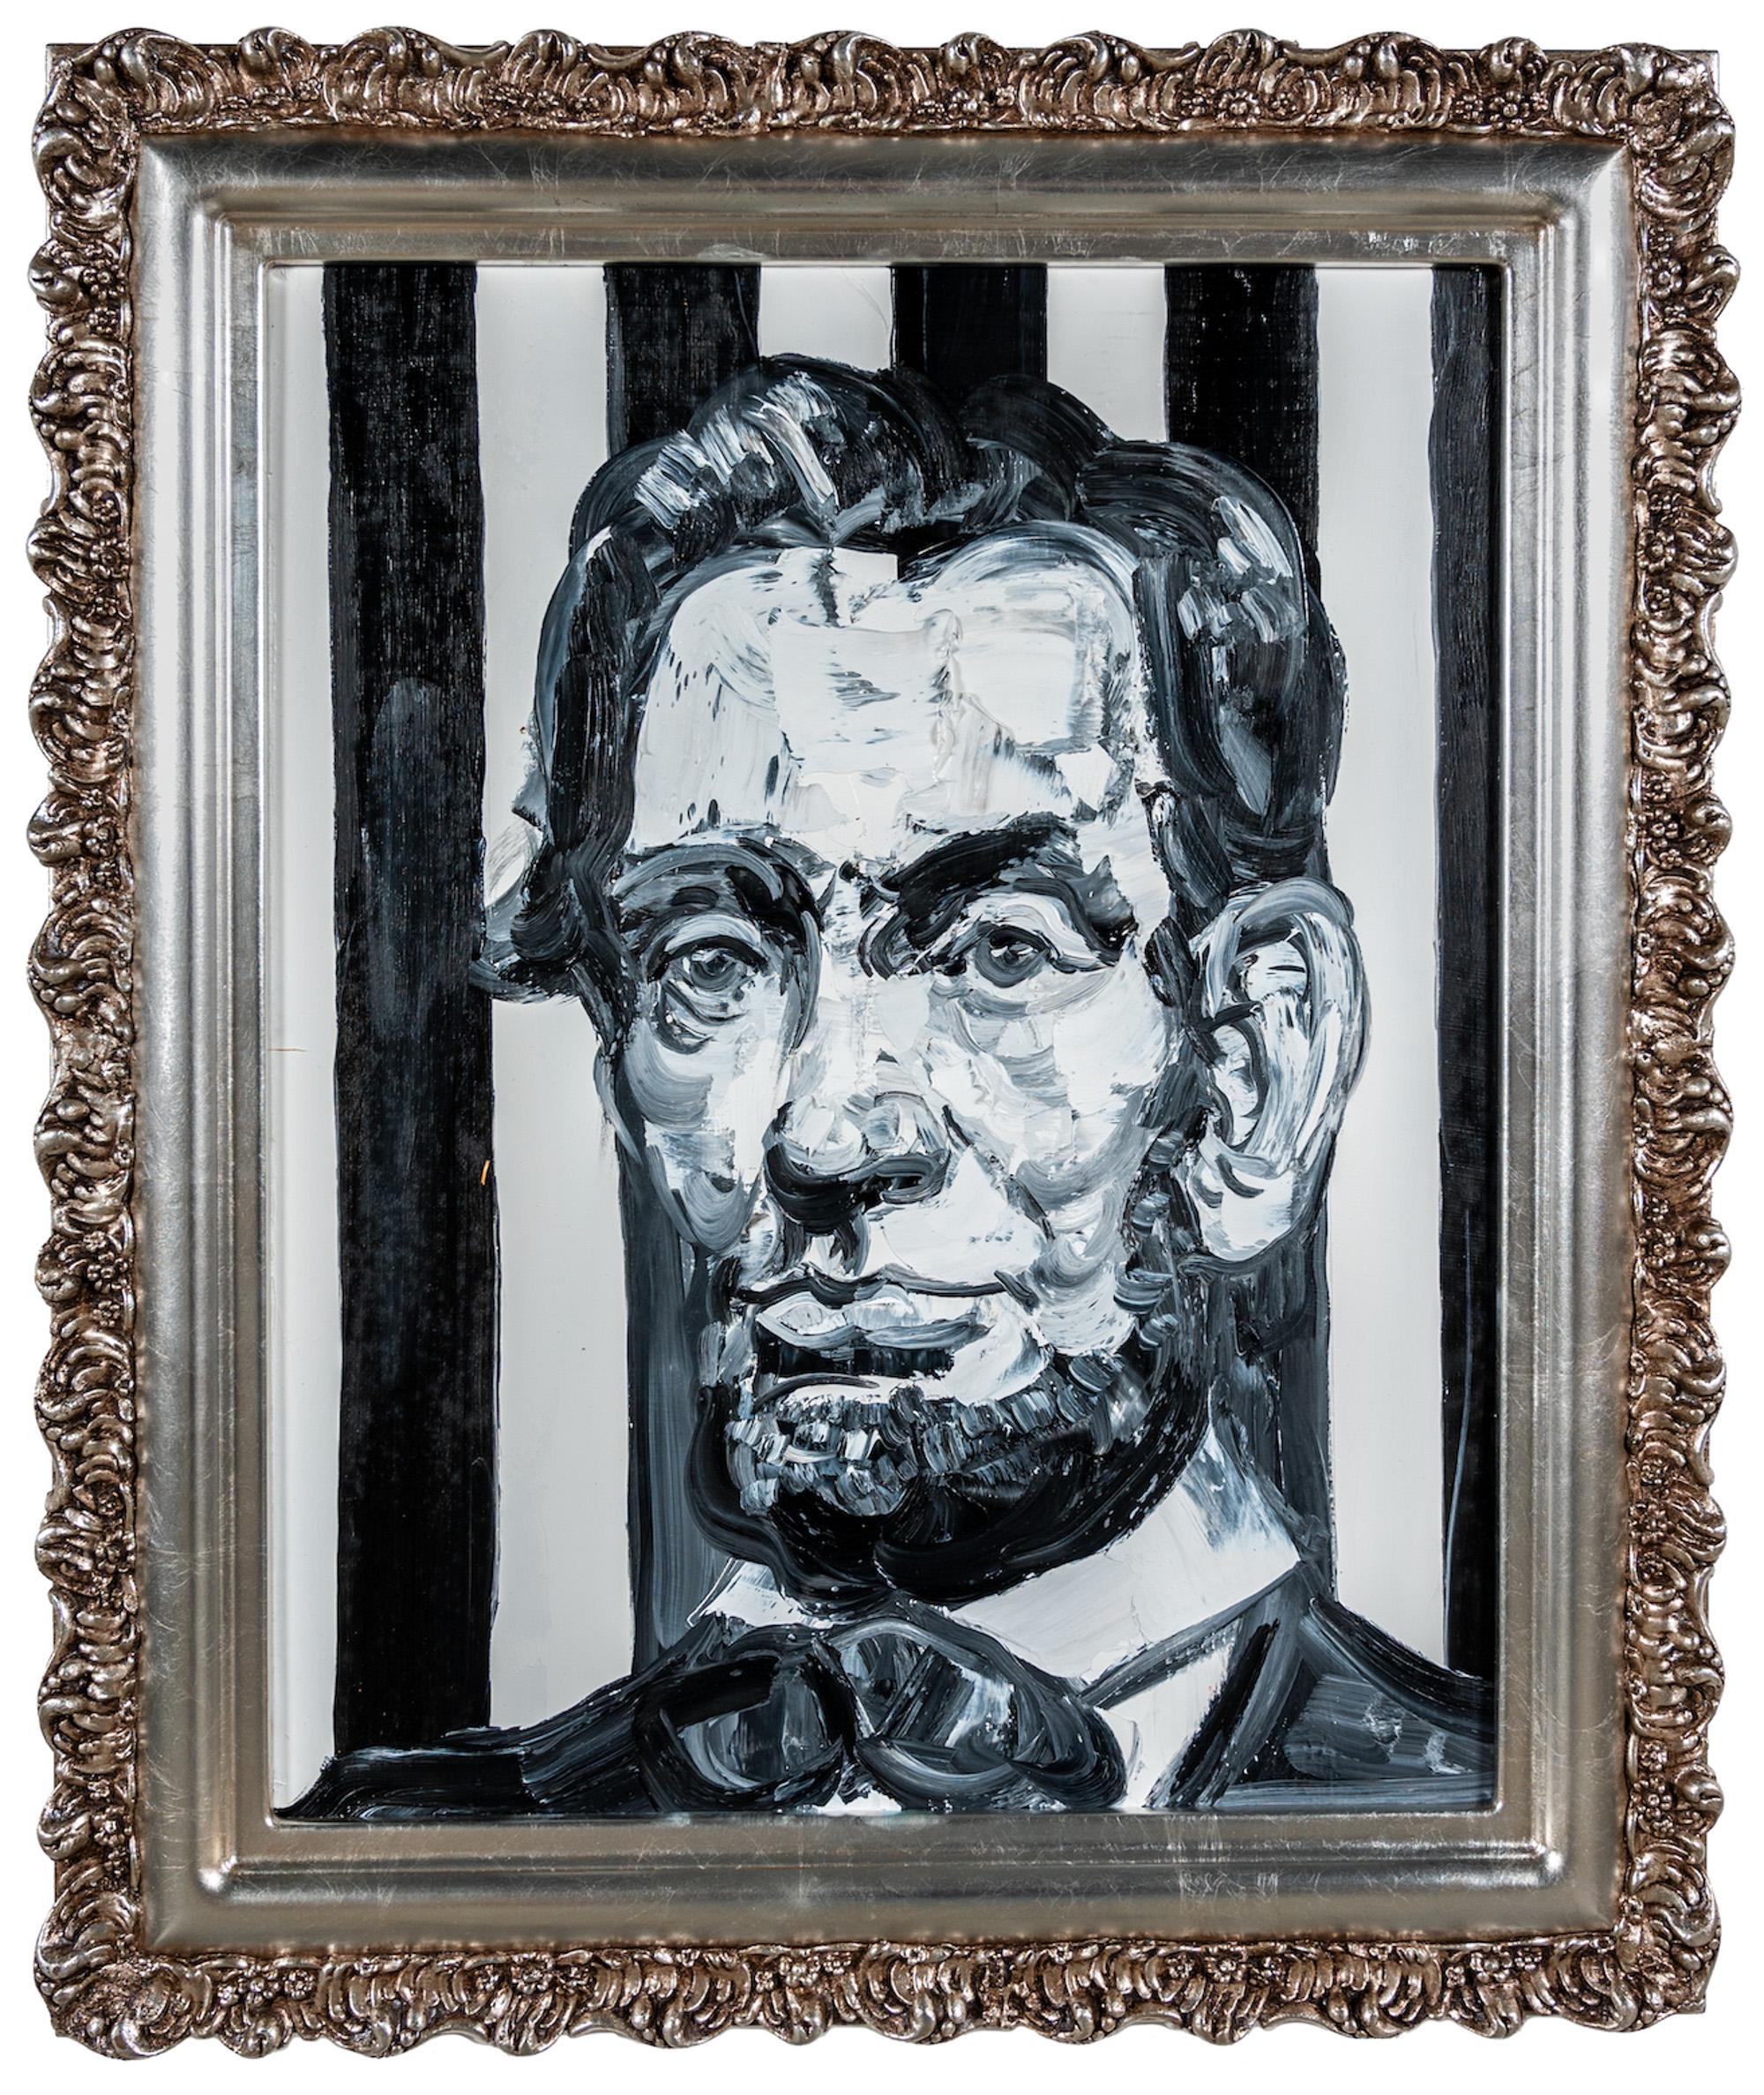 "Lincoln Black & White" is a framed oil painting on wood by Hunt Slonem, depicting President Abraham Lincoln amid a striped monochromatic background. 

This piece is finished in an antique frame, which has been hand-selected by the artist for this